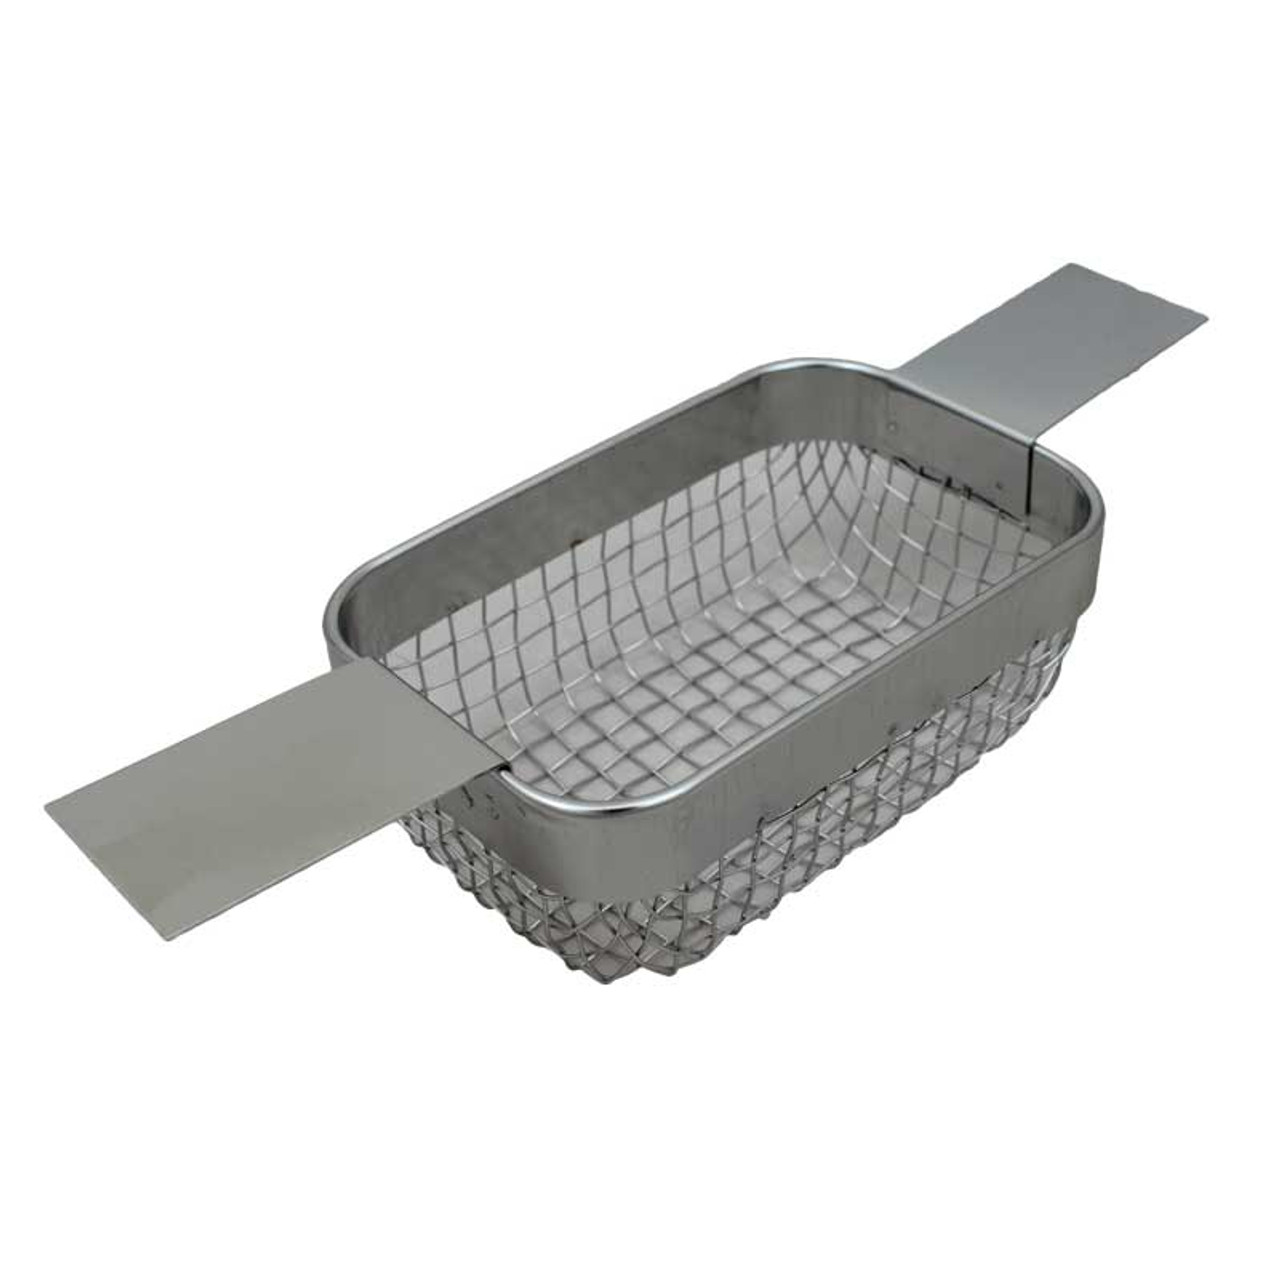 Rectangular Cleaning Basket, Standard Mesh, 4 by 3 by 1-1/2 Inches